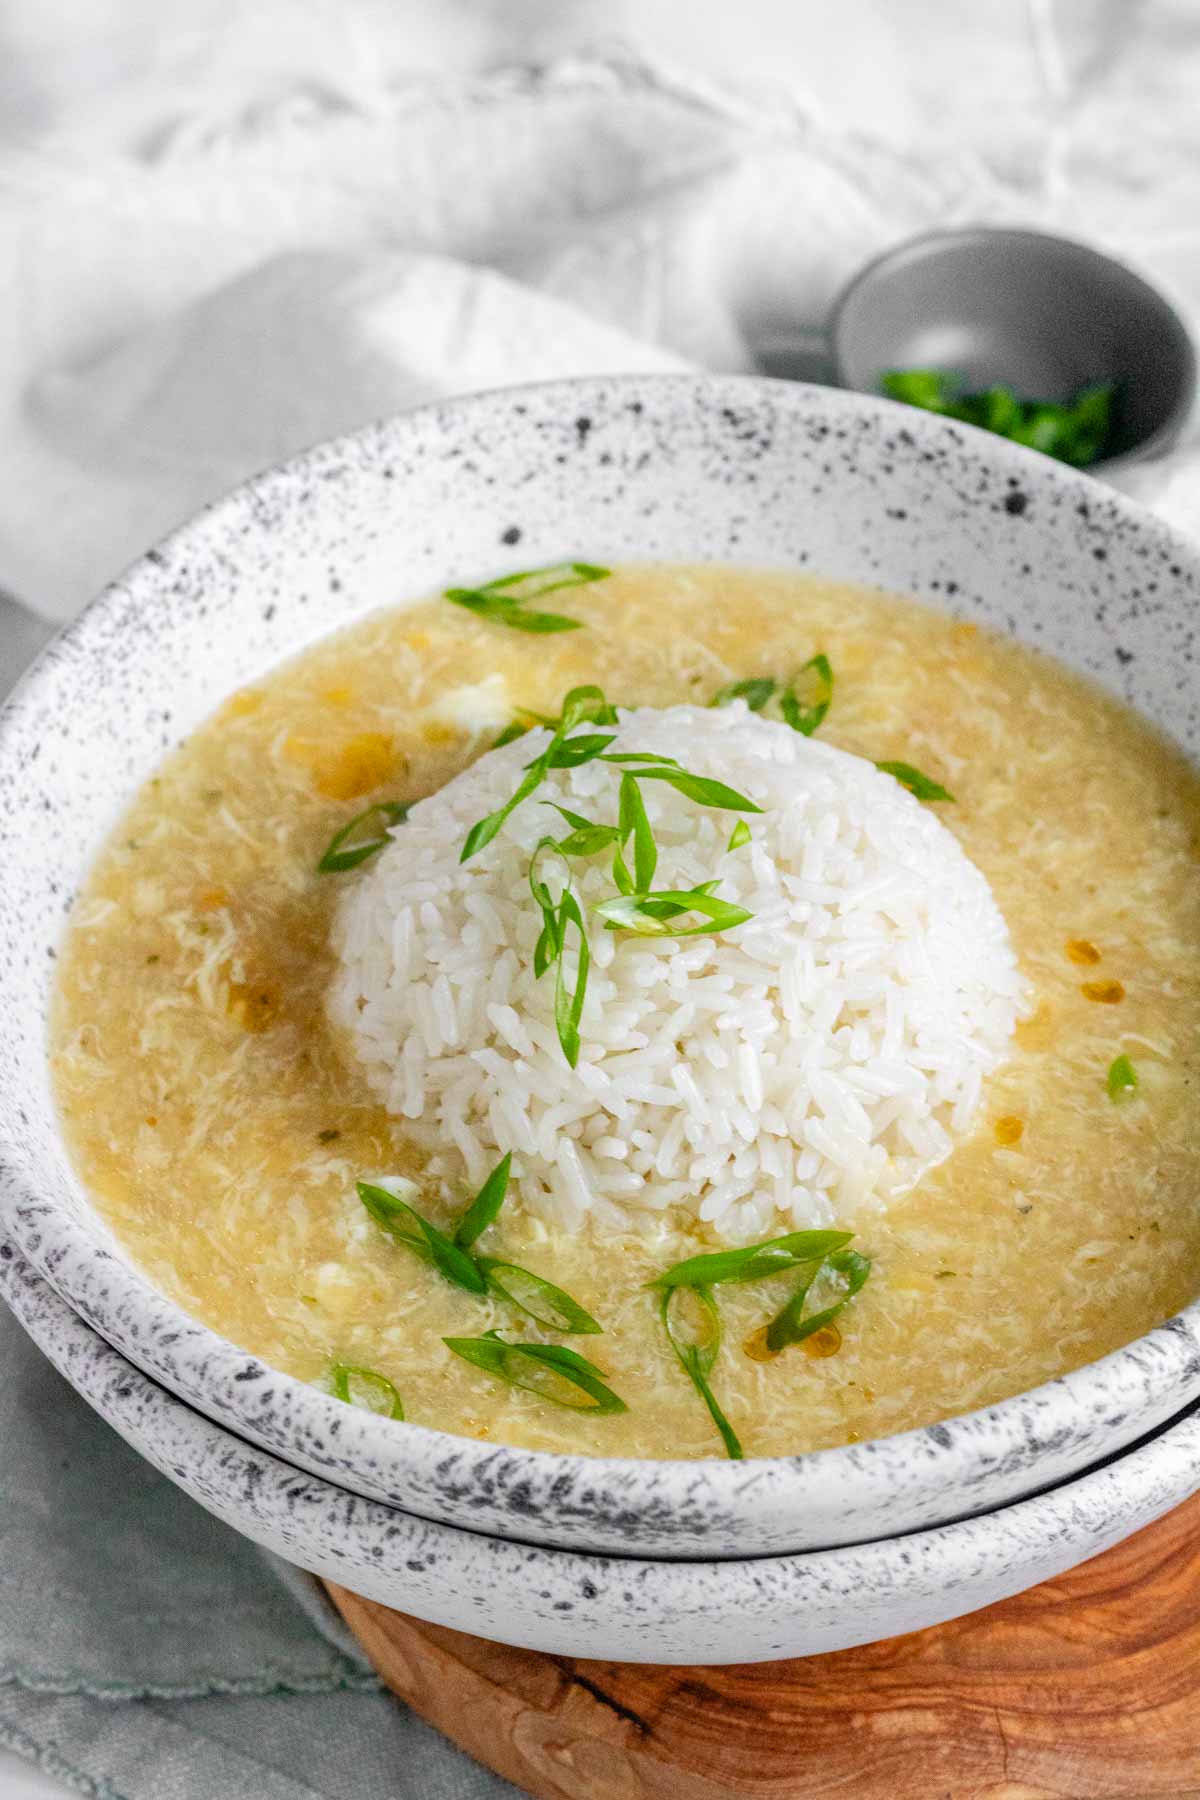 Egg drop soup in a bowl with a rounded ball of rice in the center and green onions on top.